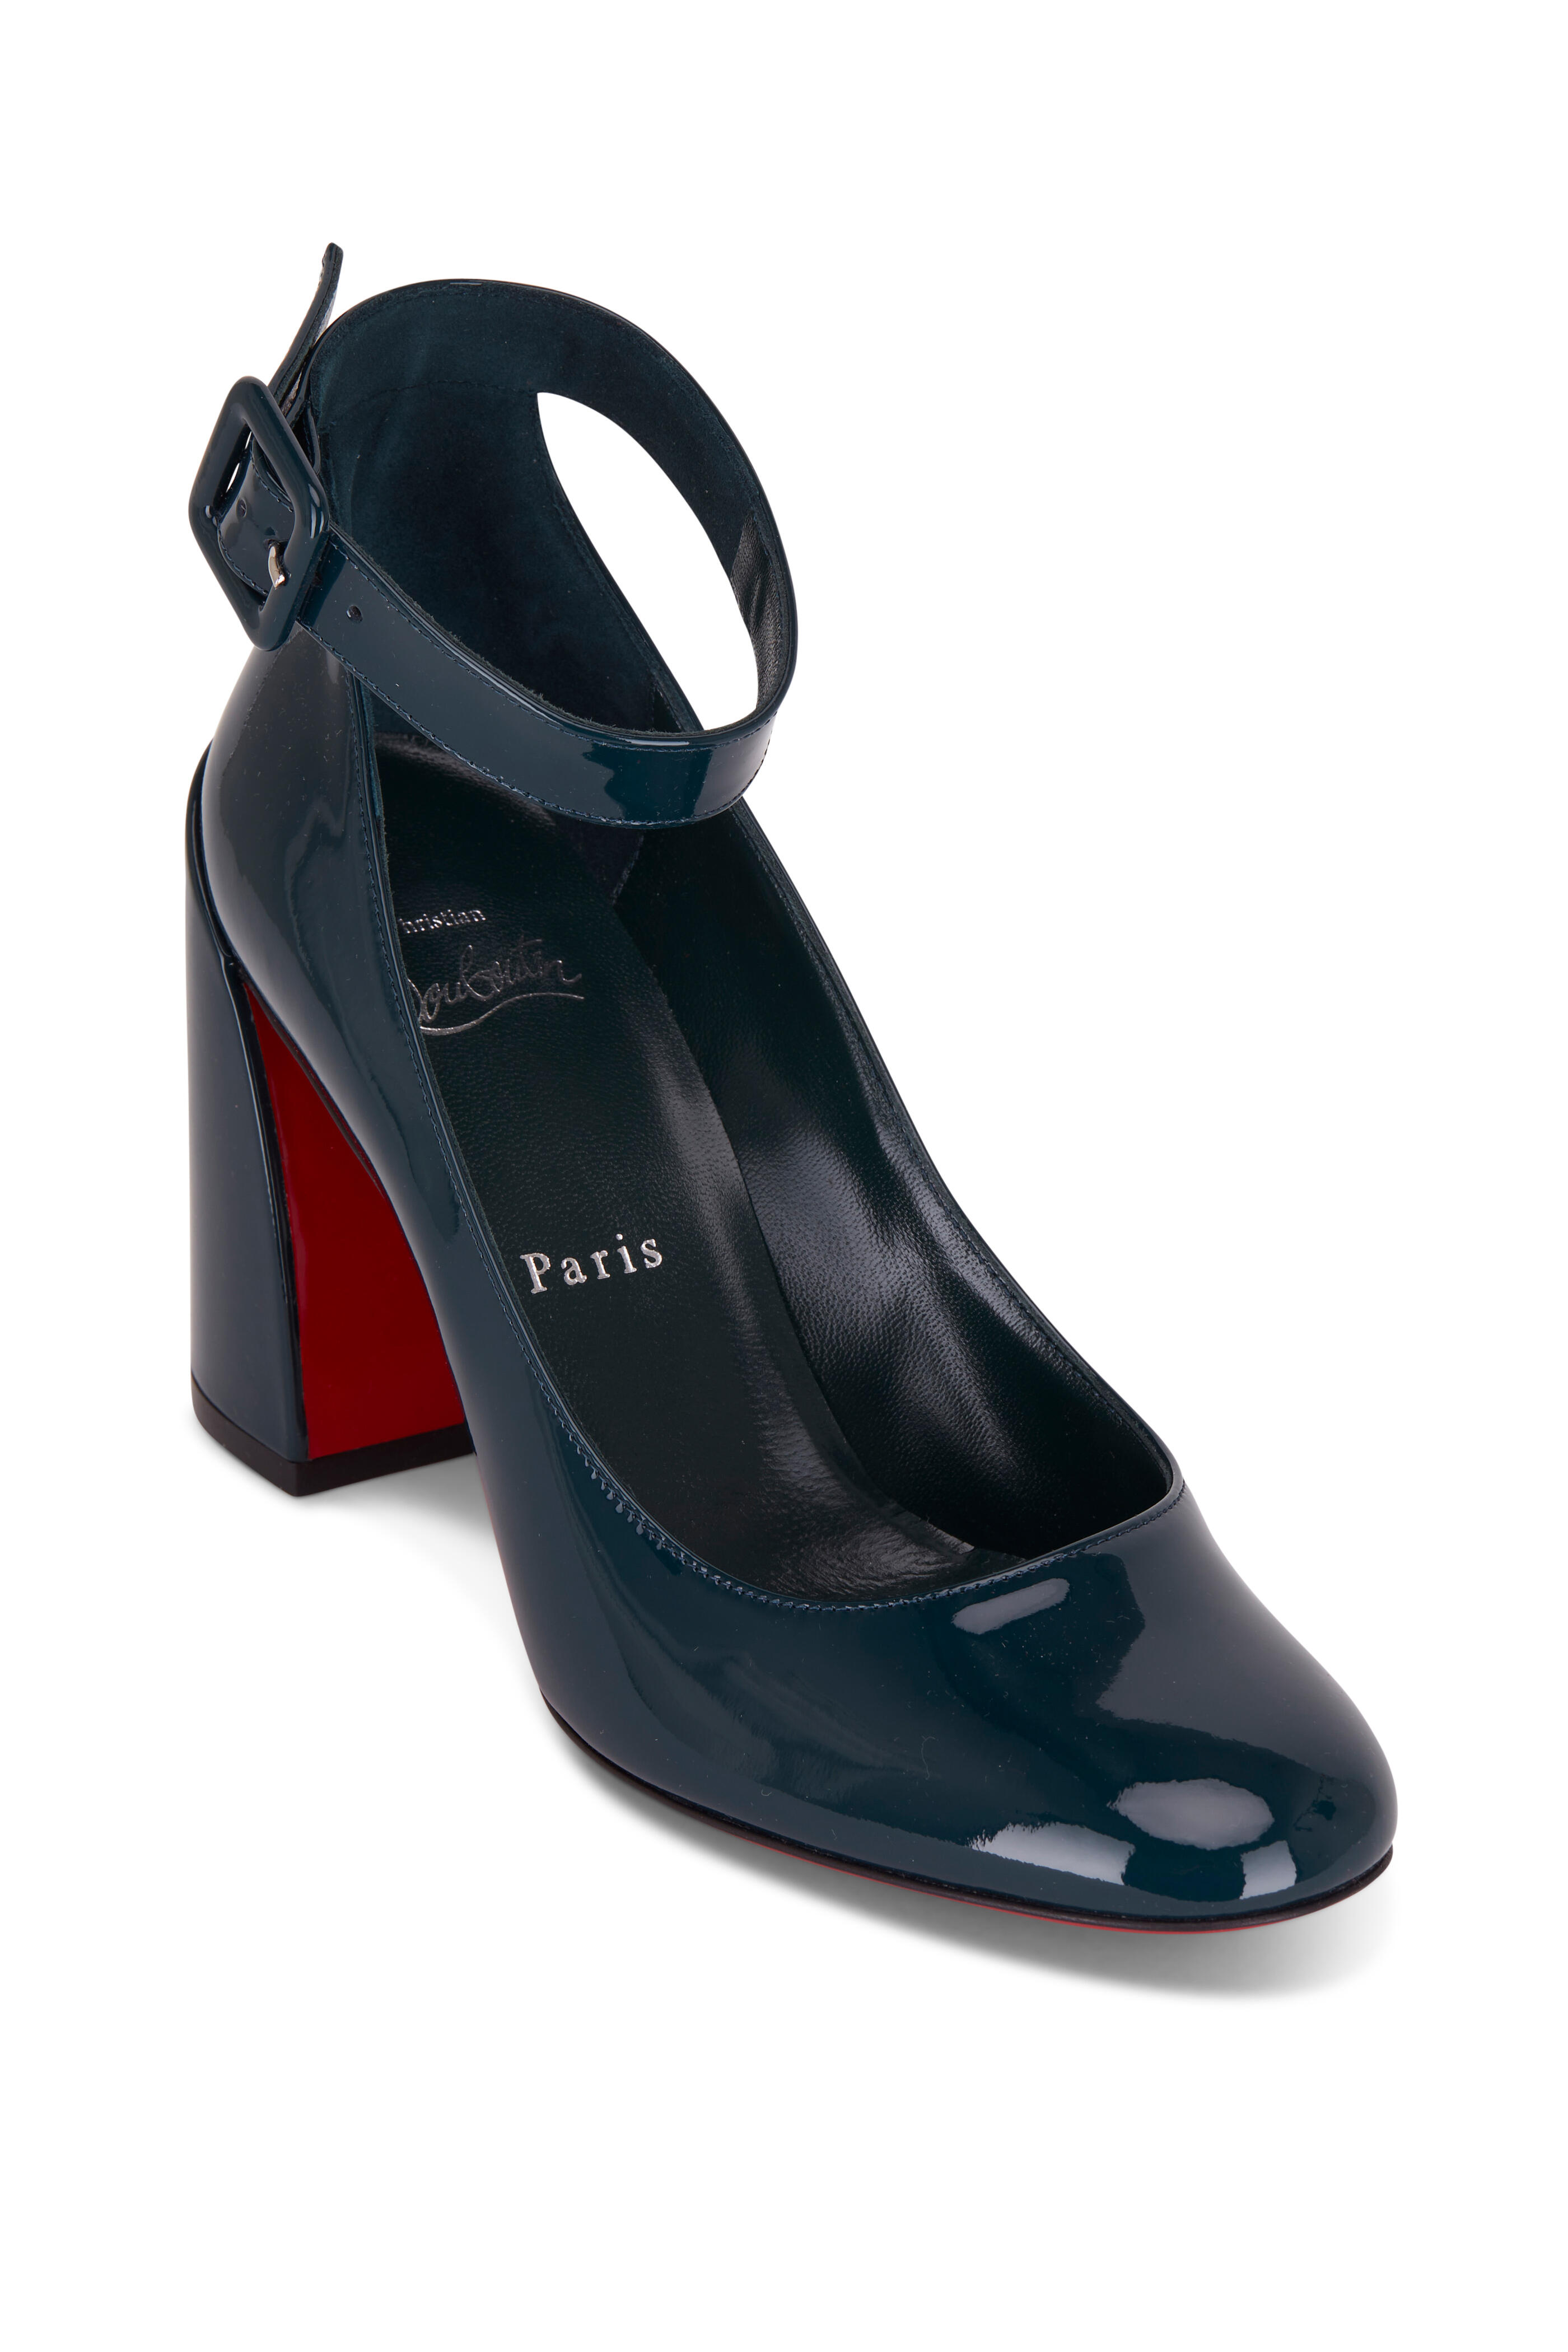 ekstra Tage med Overgivelse Christian Louboutin - Mary Jane Vosges Patent Leather Pump, 85mm